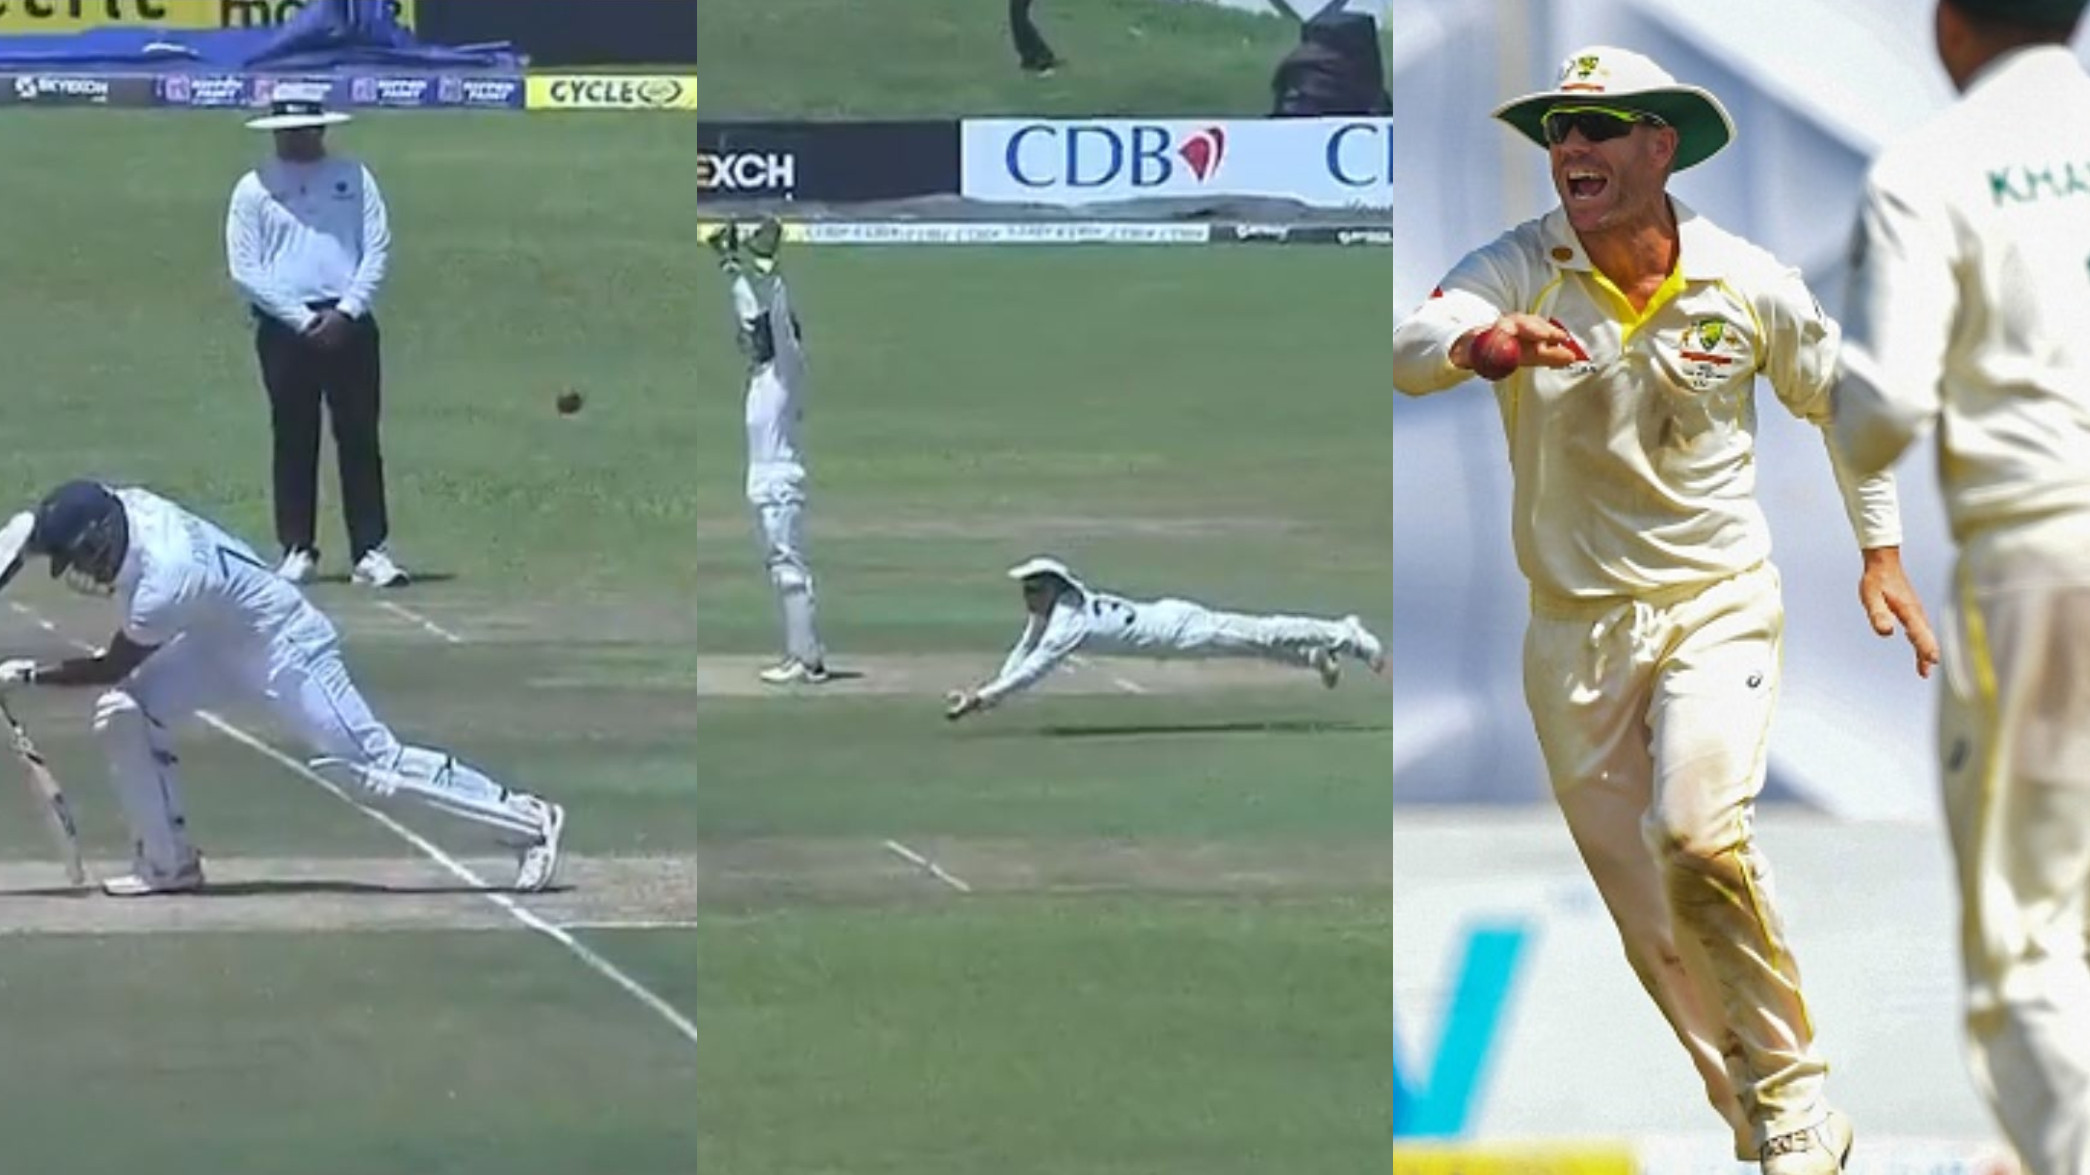 SL v AUS 2022: WATCH- David Warner’s awareness results in a ripper of a diving catch to dismiss Karunaratne